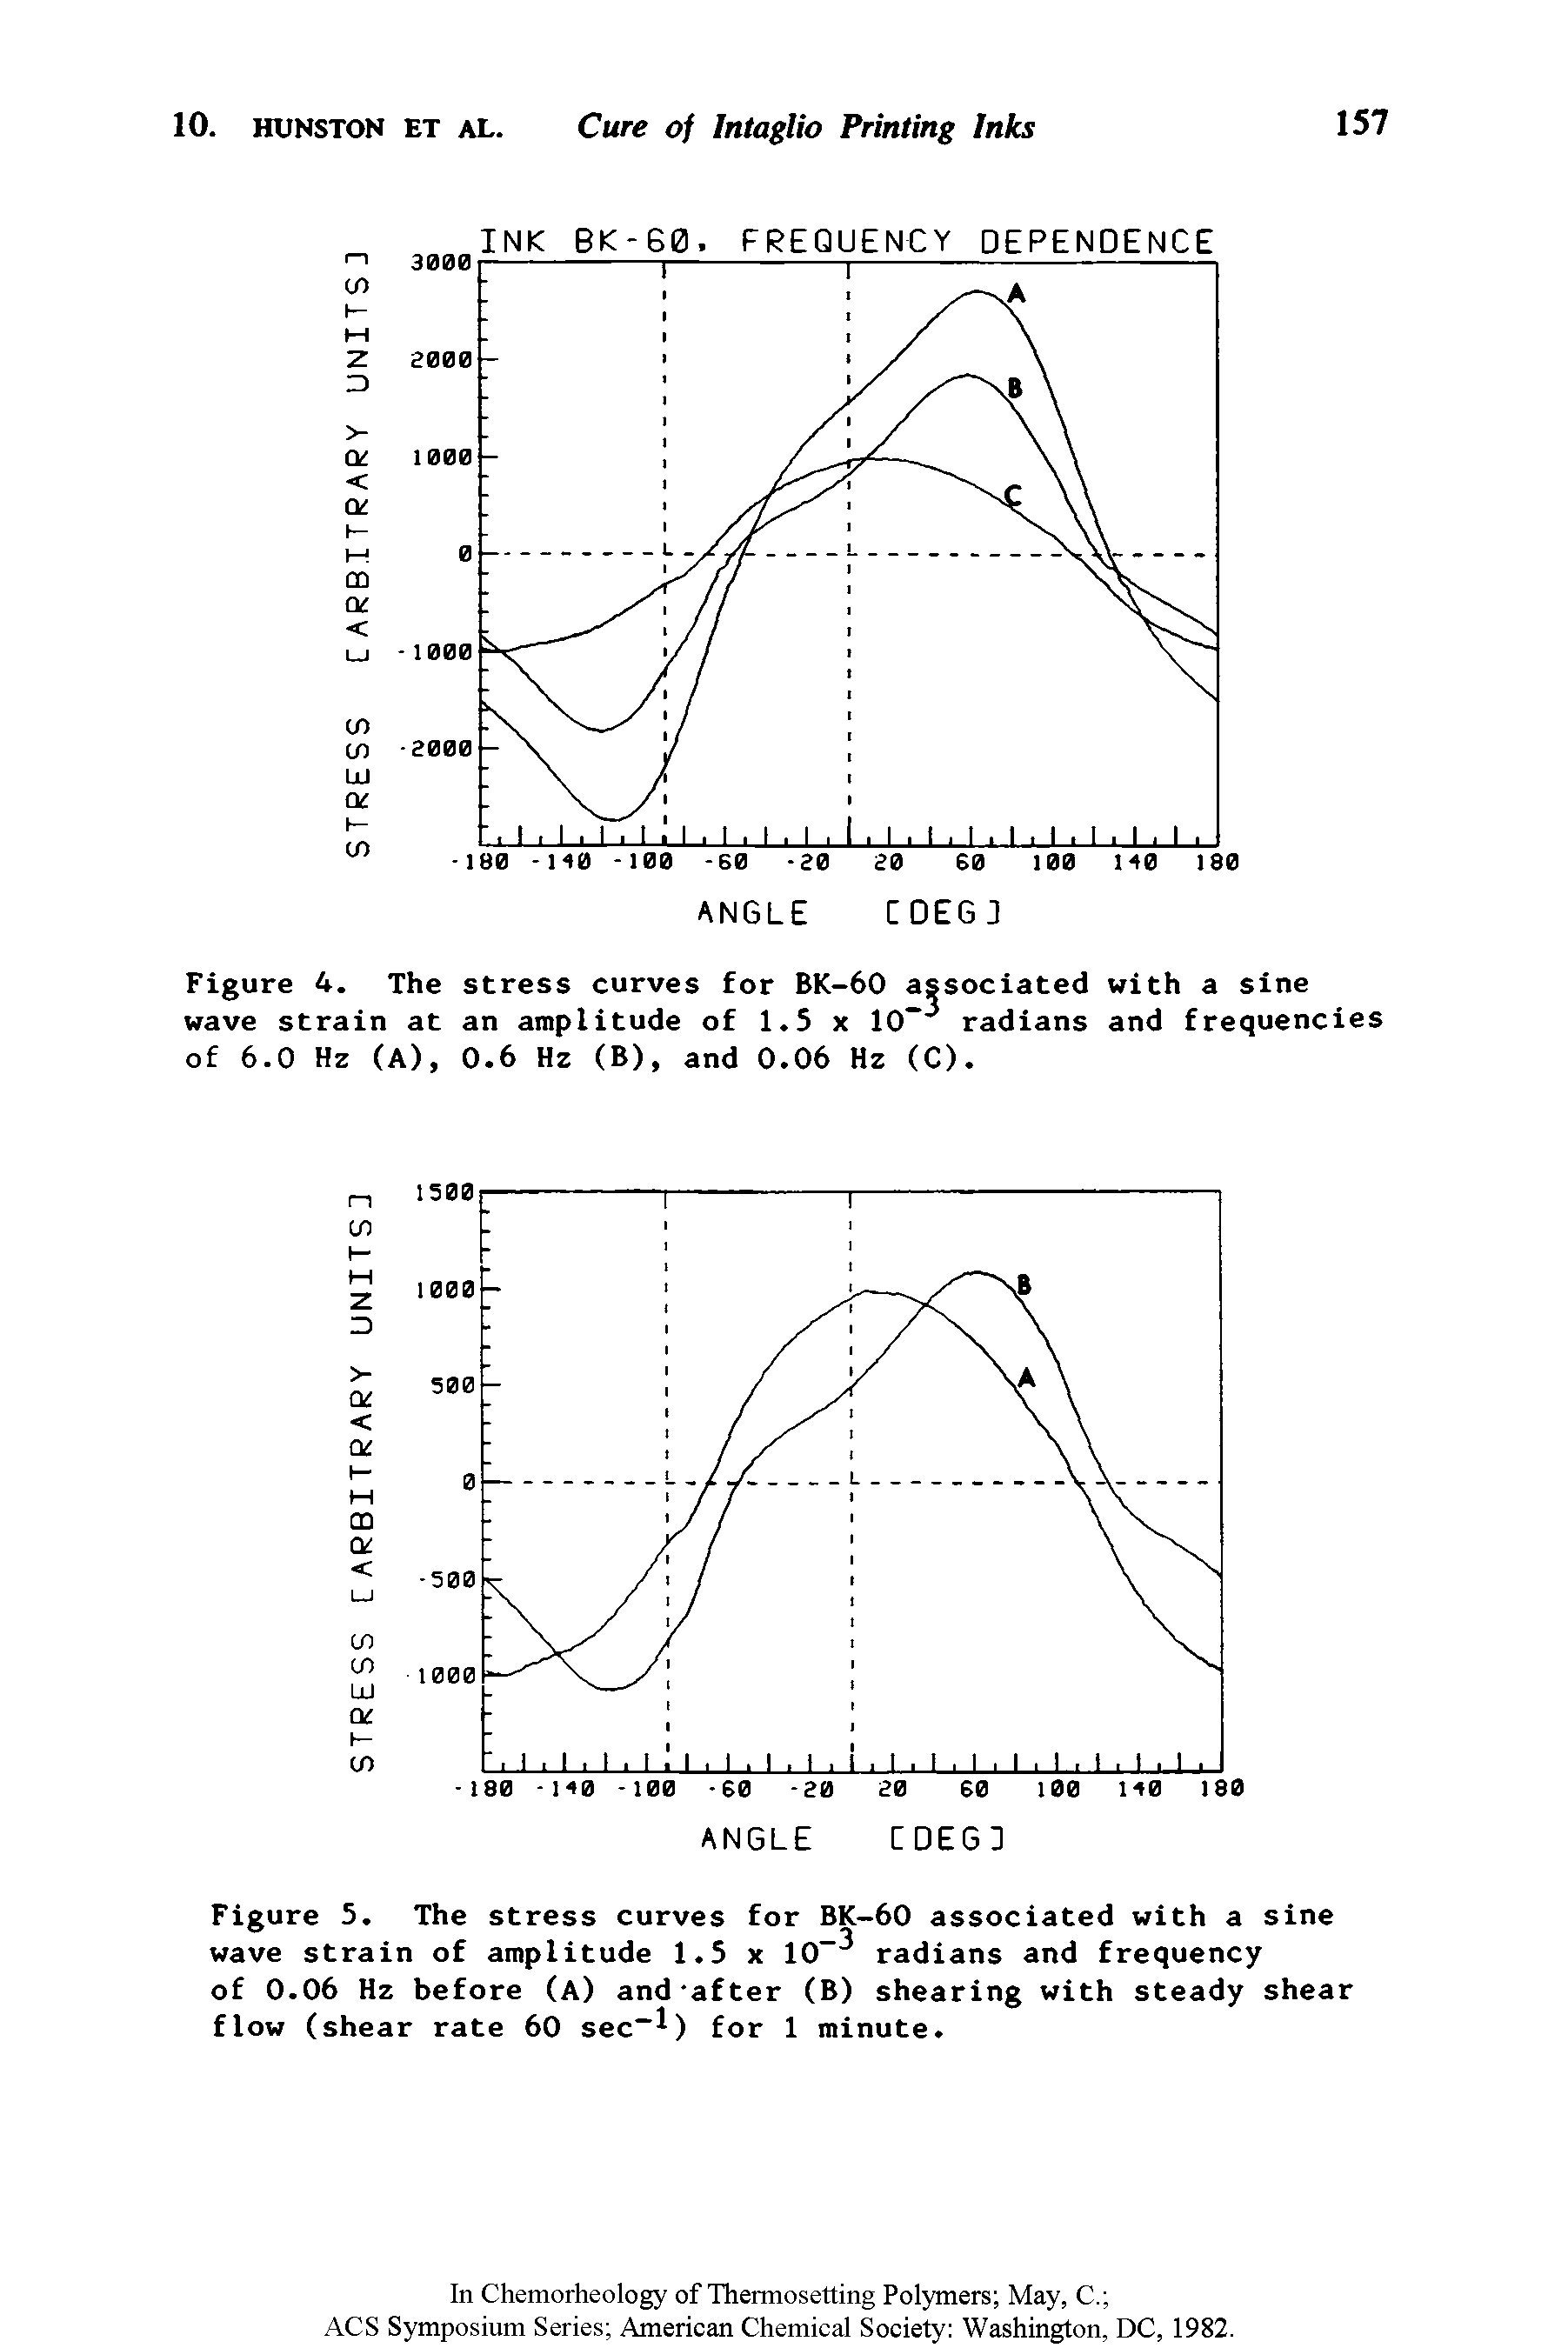 Figure 5. The stress curves for BK-60 associated with a sine wave strain of amplitude 1.5 x 10 radians and frequency of 0.06 Hz before (A) and-after (B) shearing with steady shear flow (shear rate 60 sec ) for 1 minute.